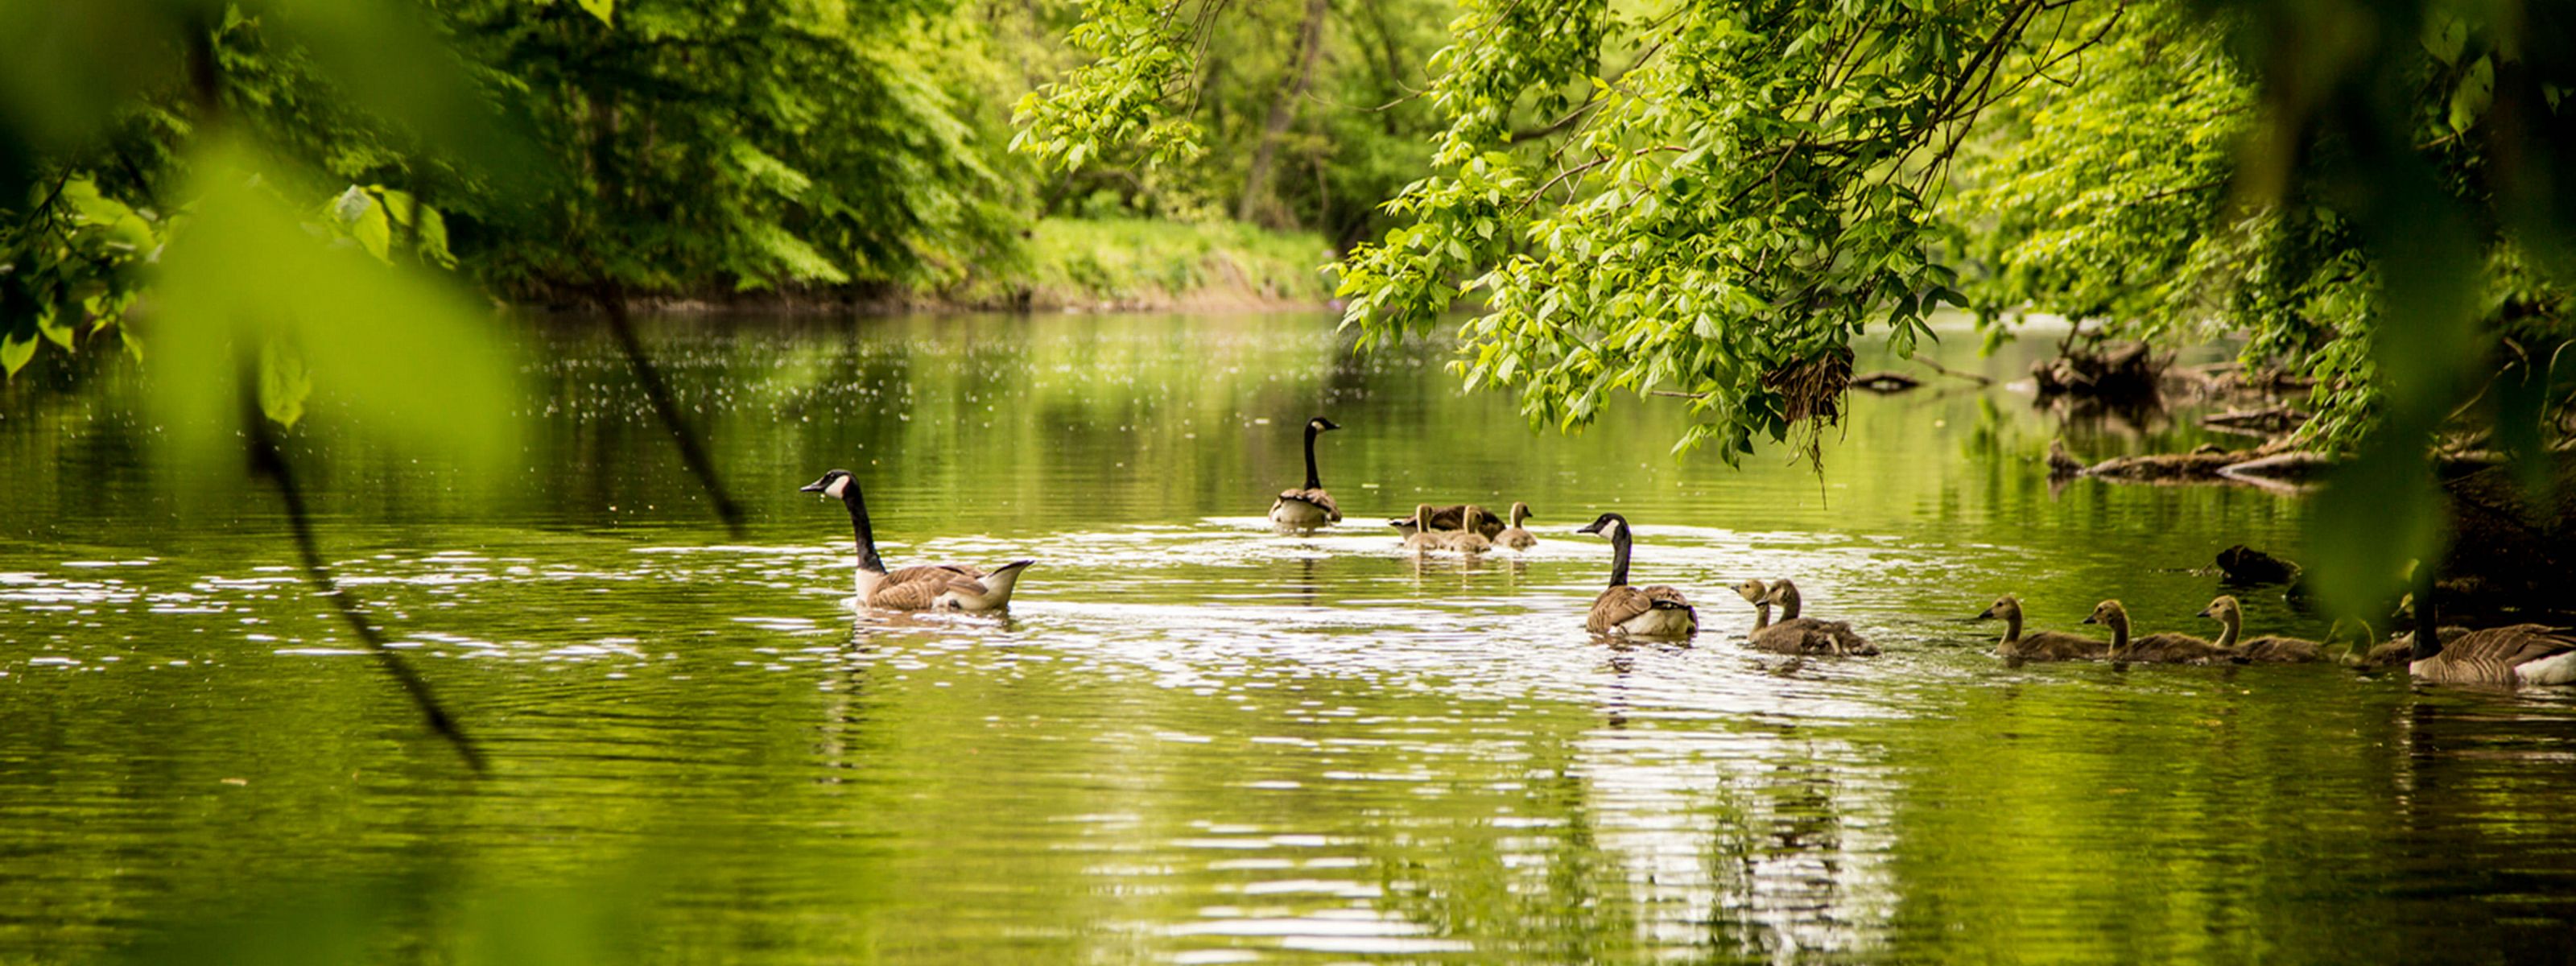 An adult and baby geese swim in a body of water surrounded by greenery.